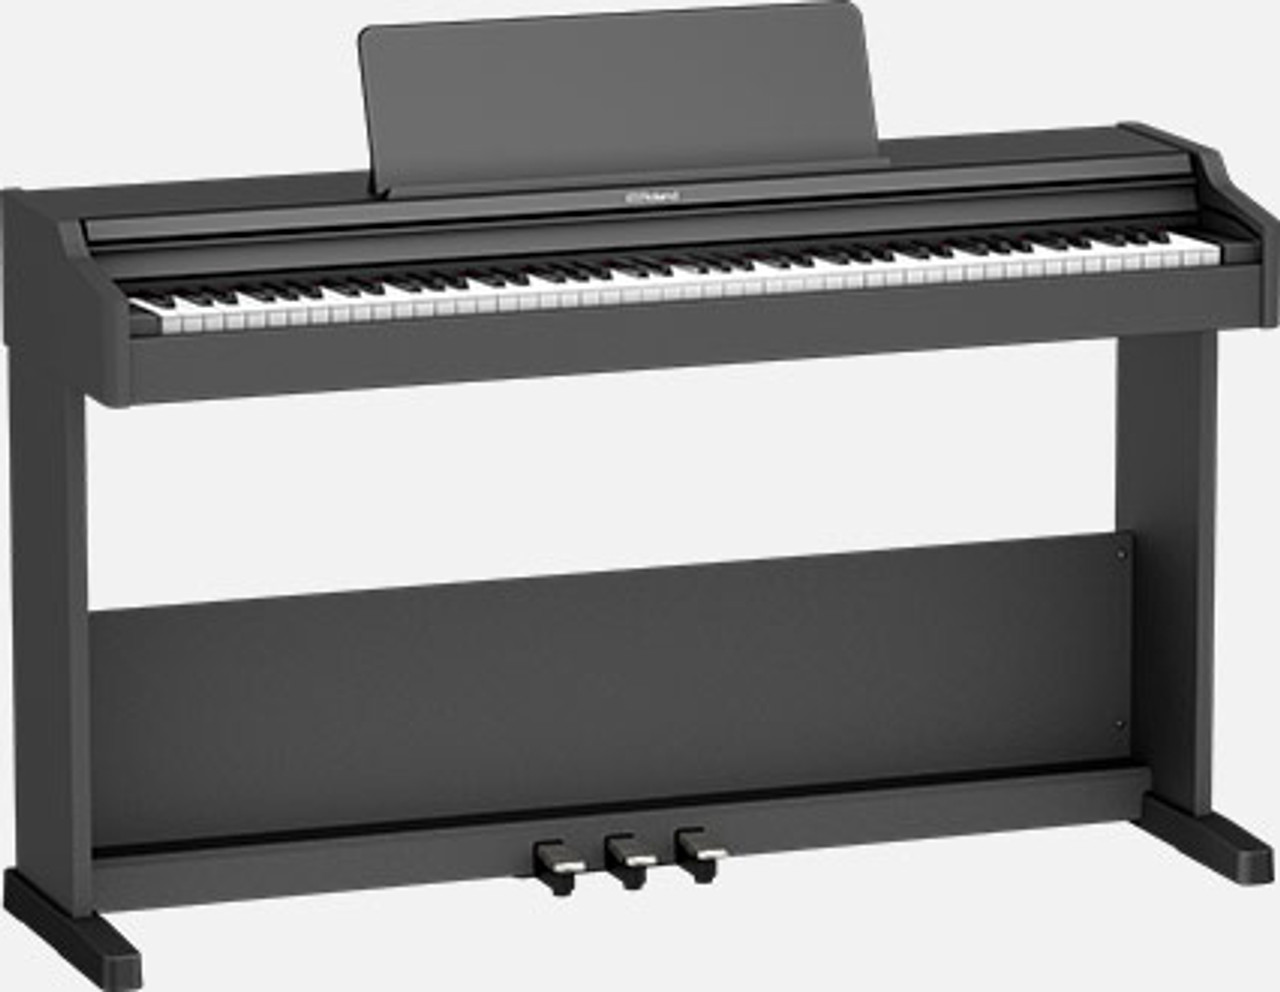 Compact and affordable home piano with traditional upright styling, class-leading sound and playability, onboard Bluetooth&reg;, and more.